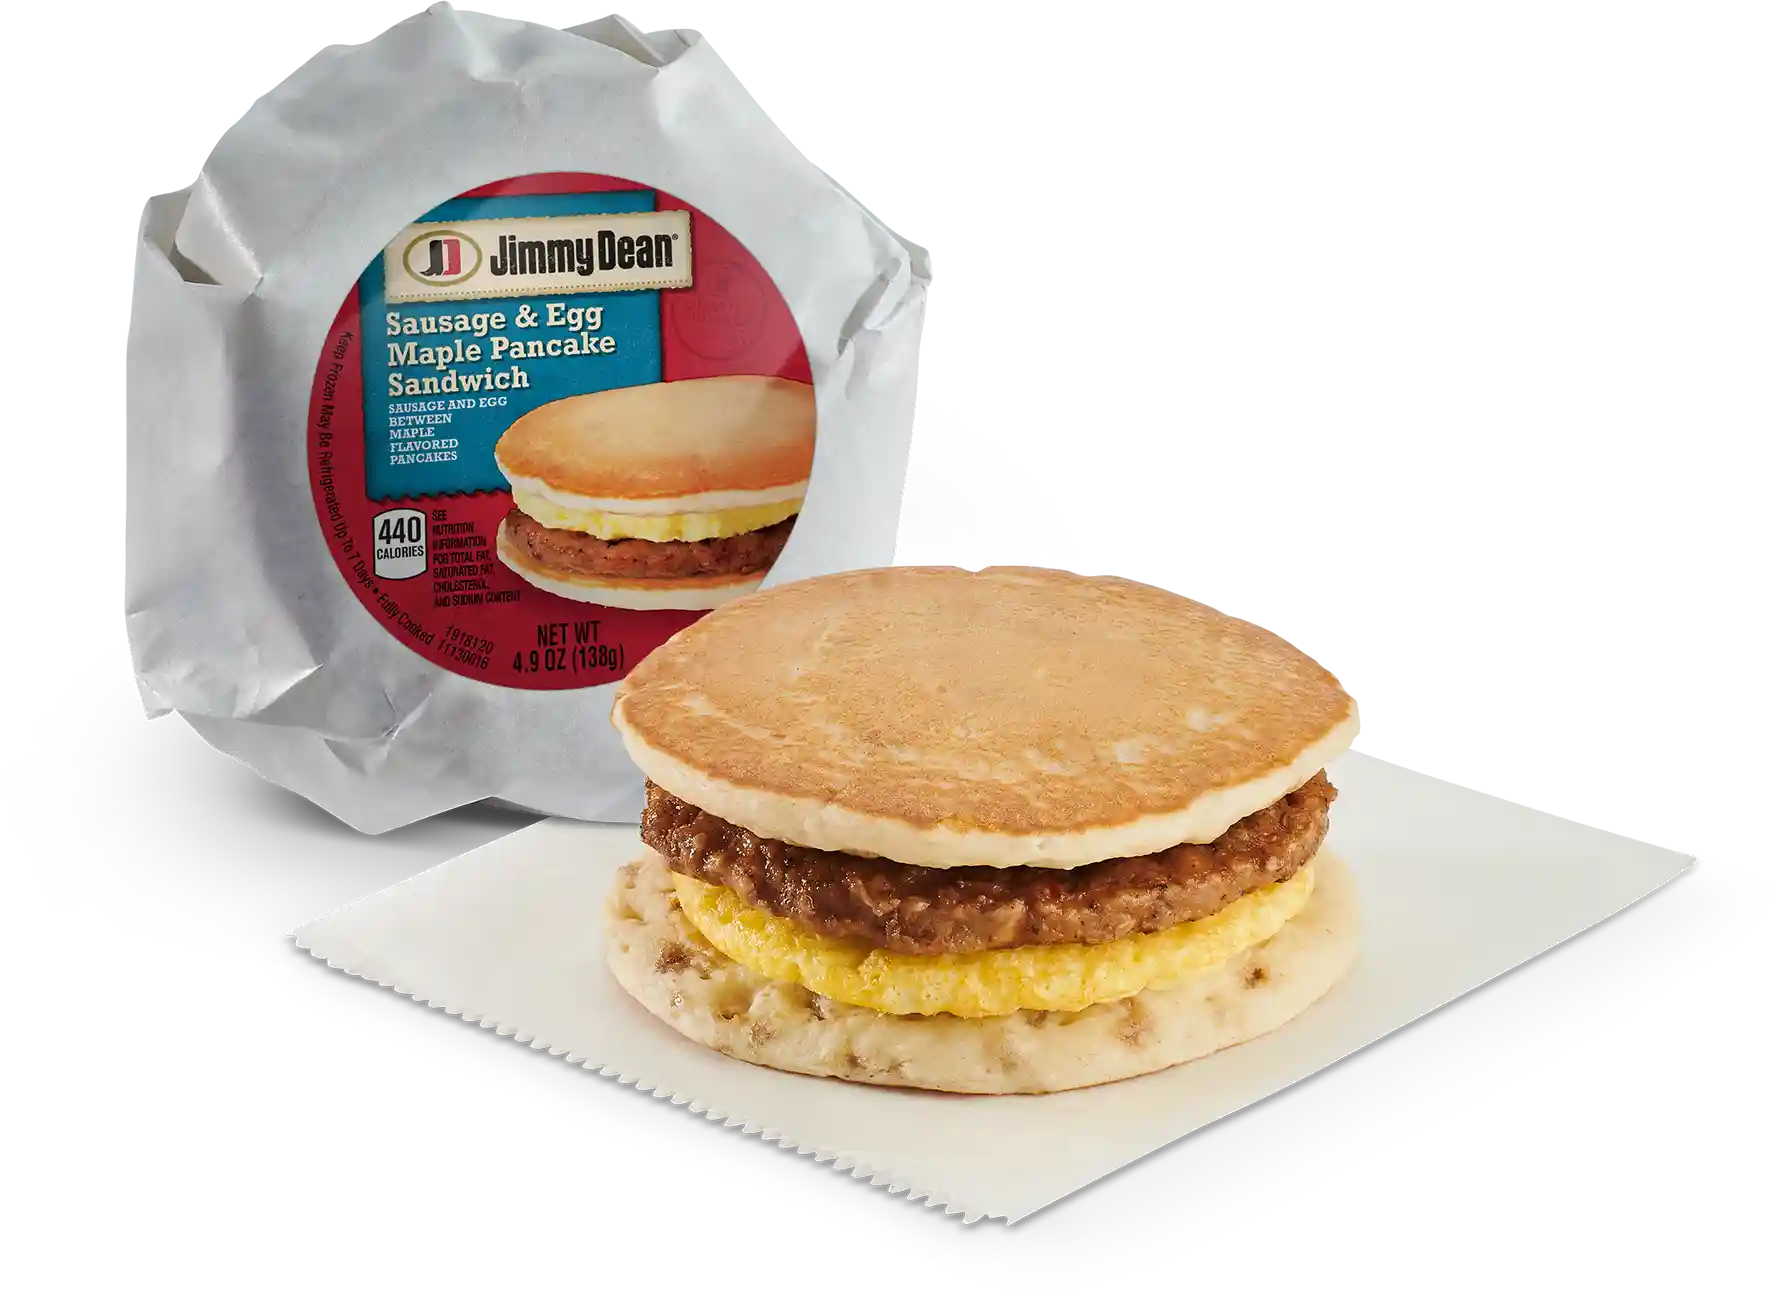 Jimmy Dean® Sausage & Egg Pancake Sandwich with Maple Syruphttps://images.salsify.com/image/upload/s--PEmtxJmH--/q_25/r0ujo3kzosxjnfqlaey2.webp